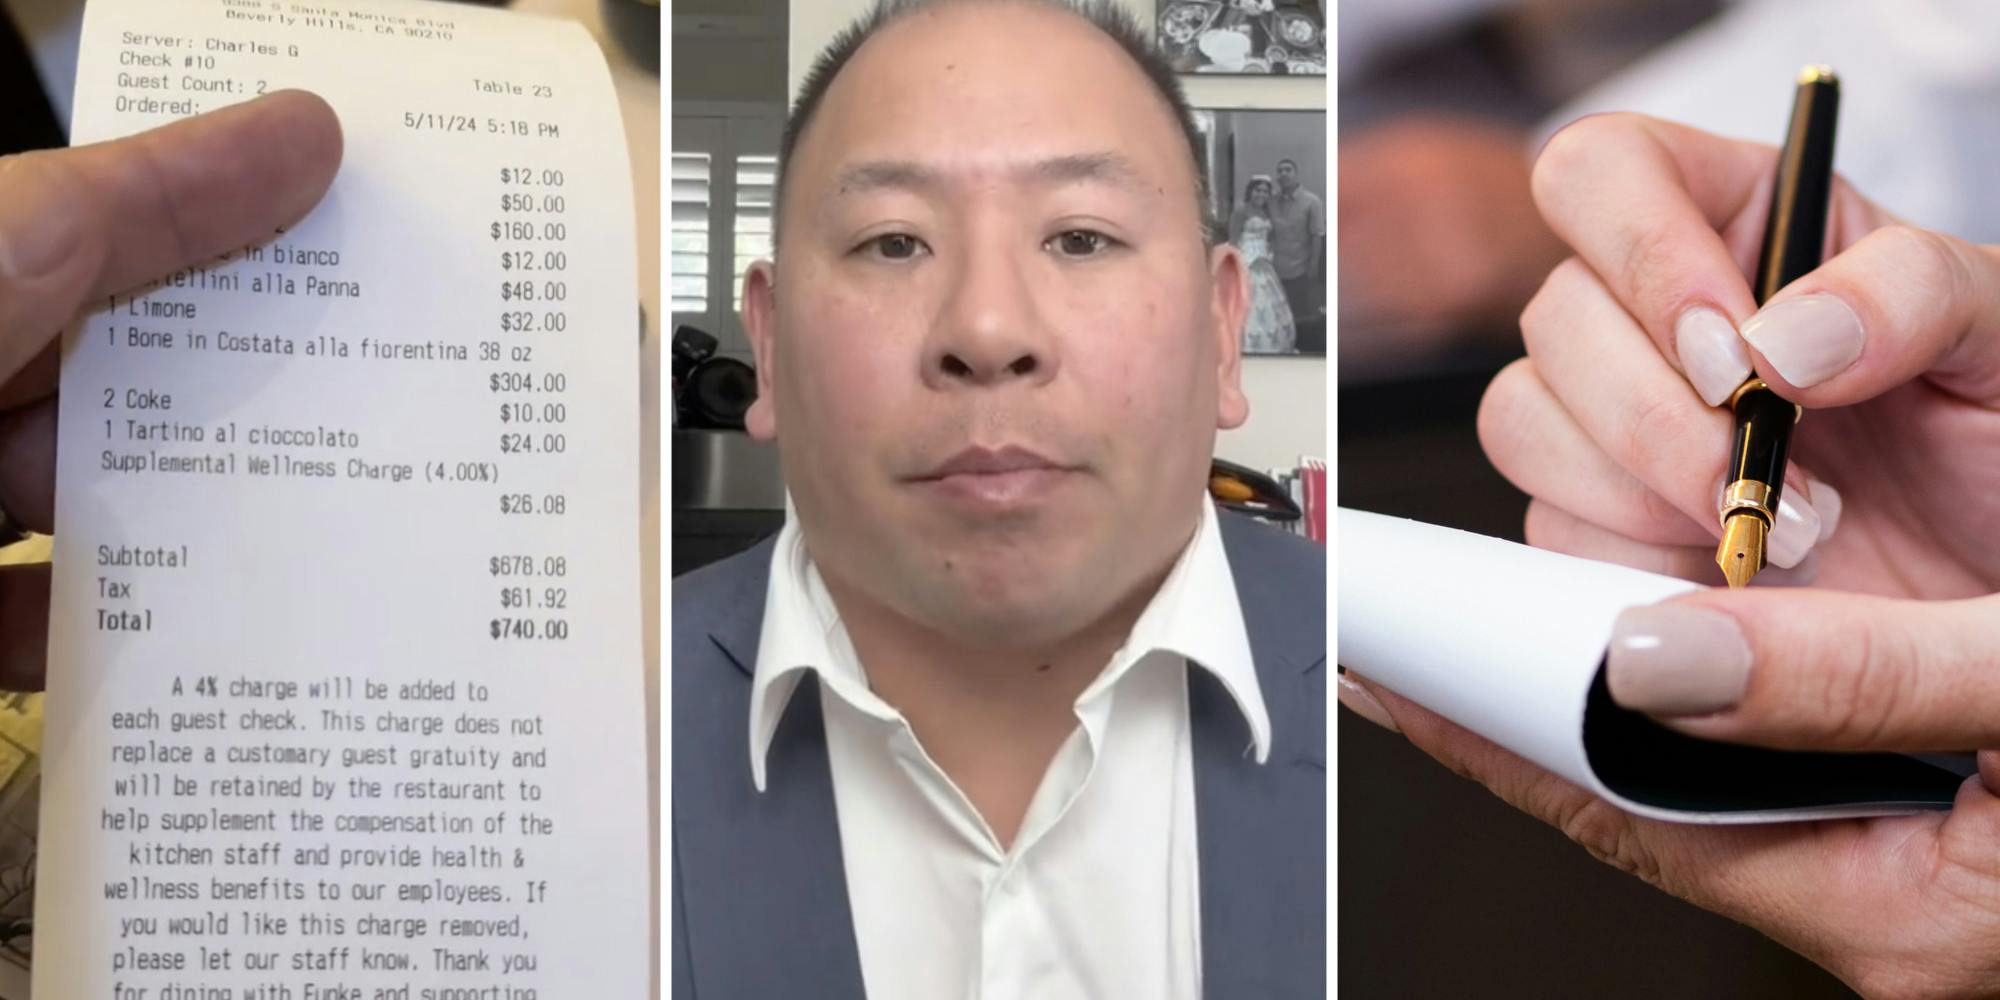 ‘Now we’re paying the workers salaries ??!!’: Restaurant customer discovers 4% wellness charge on receipt